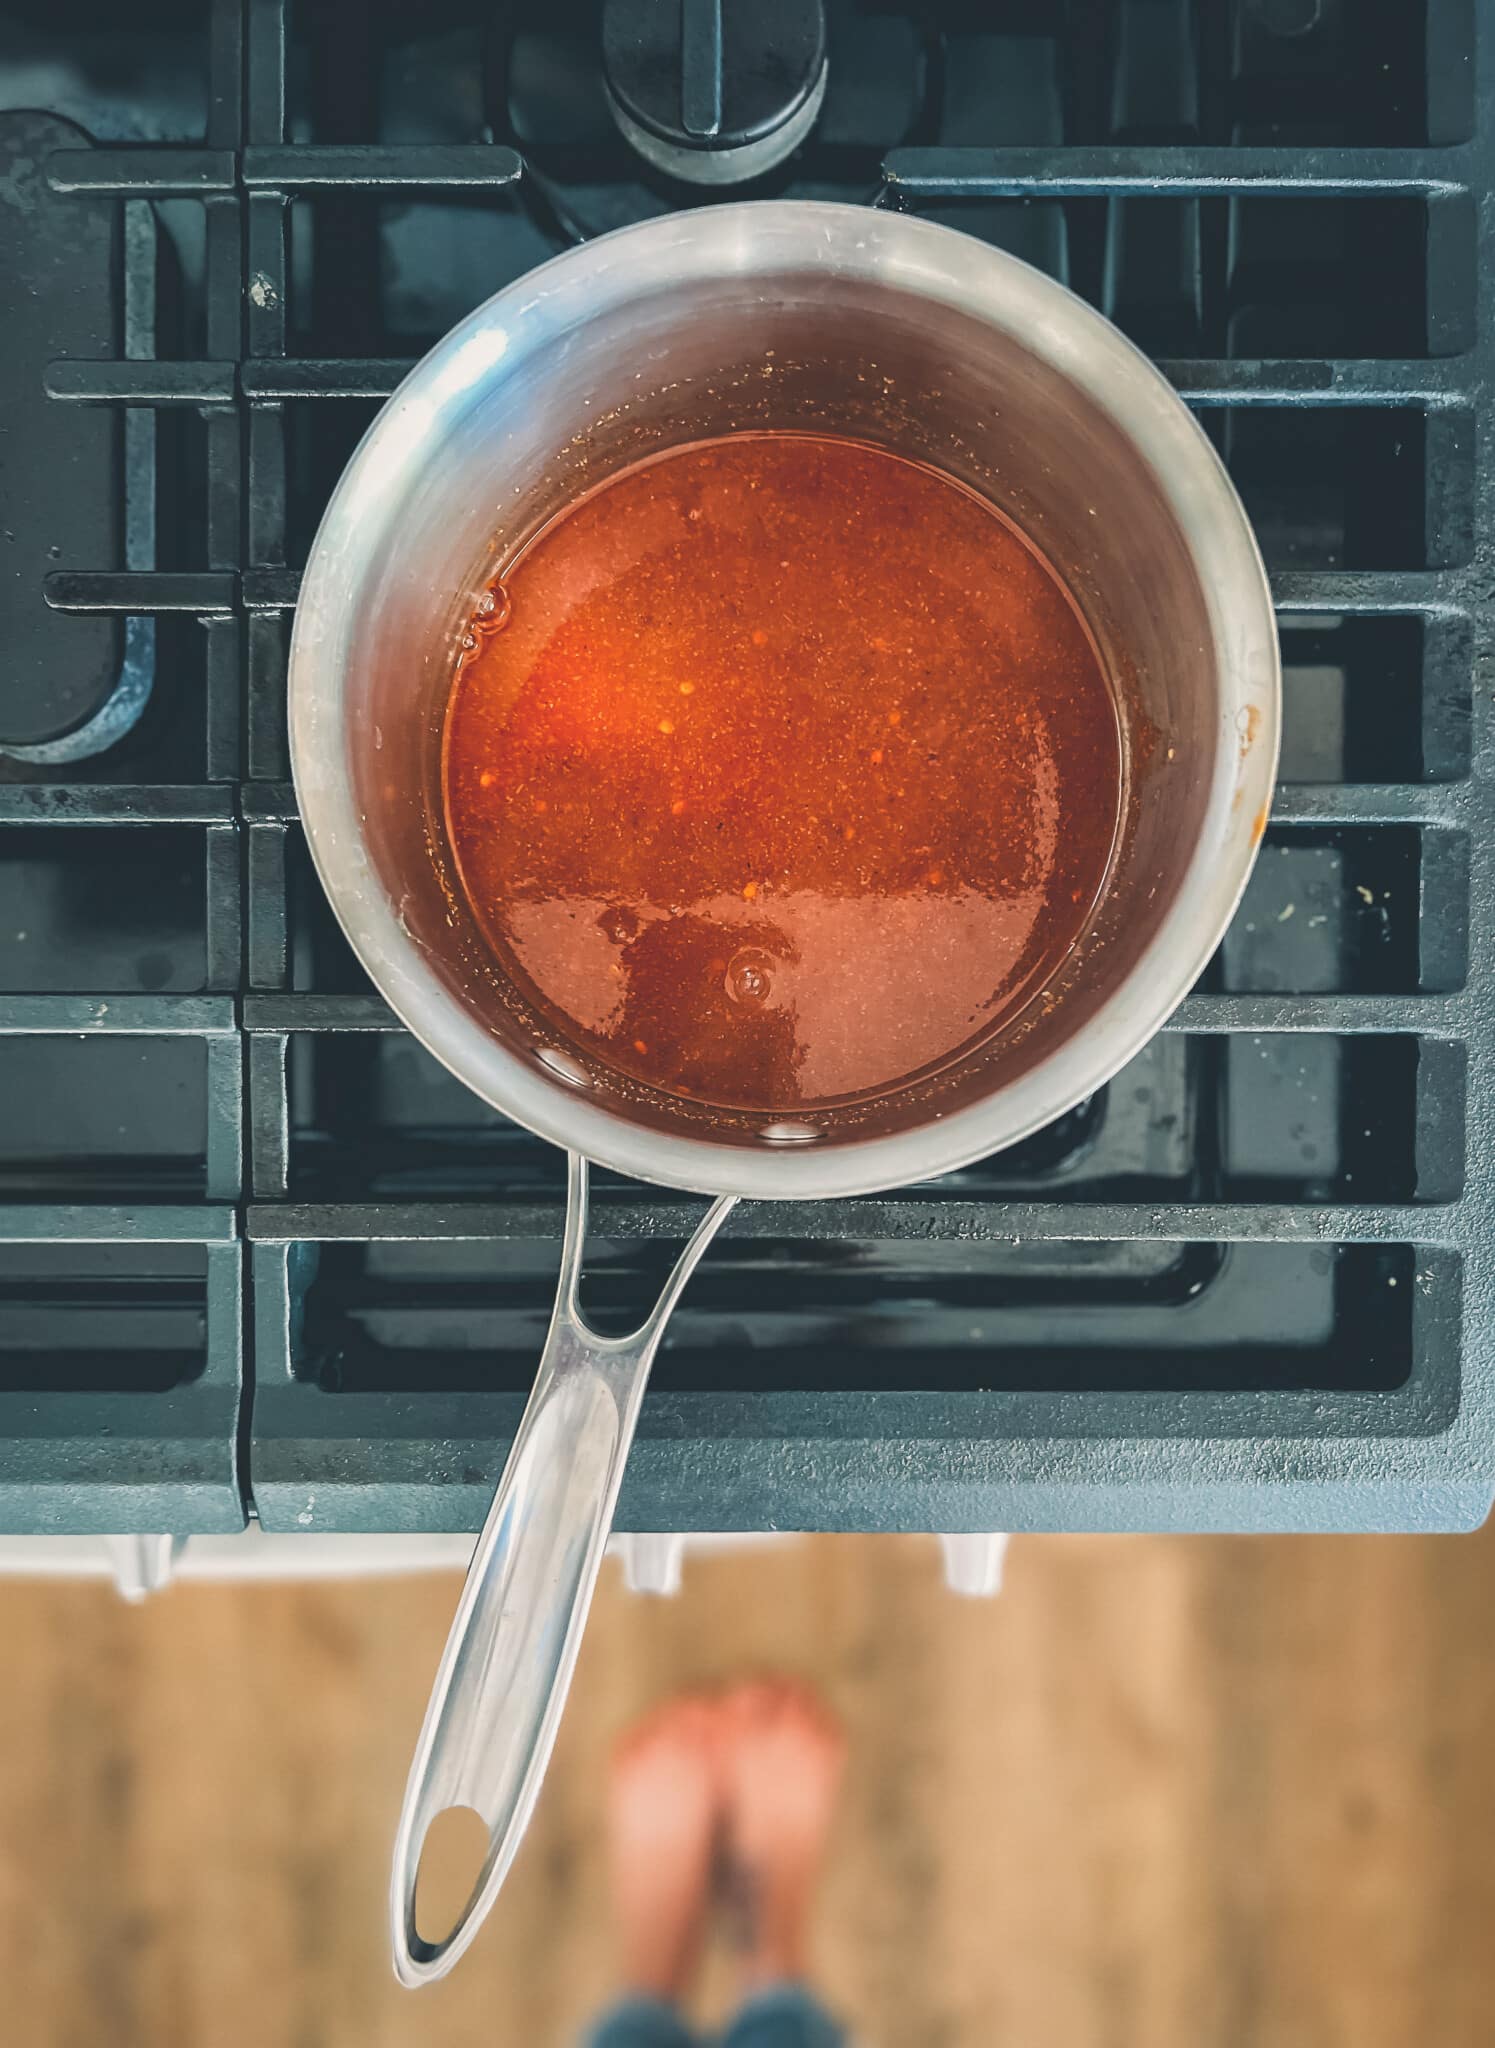 Homemade vinegar based bbq sauce is the best recipe for every bbq recipe you're making! 